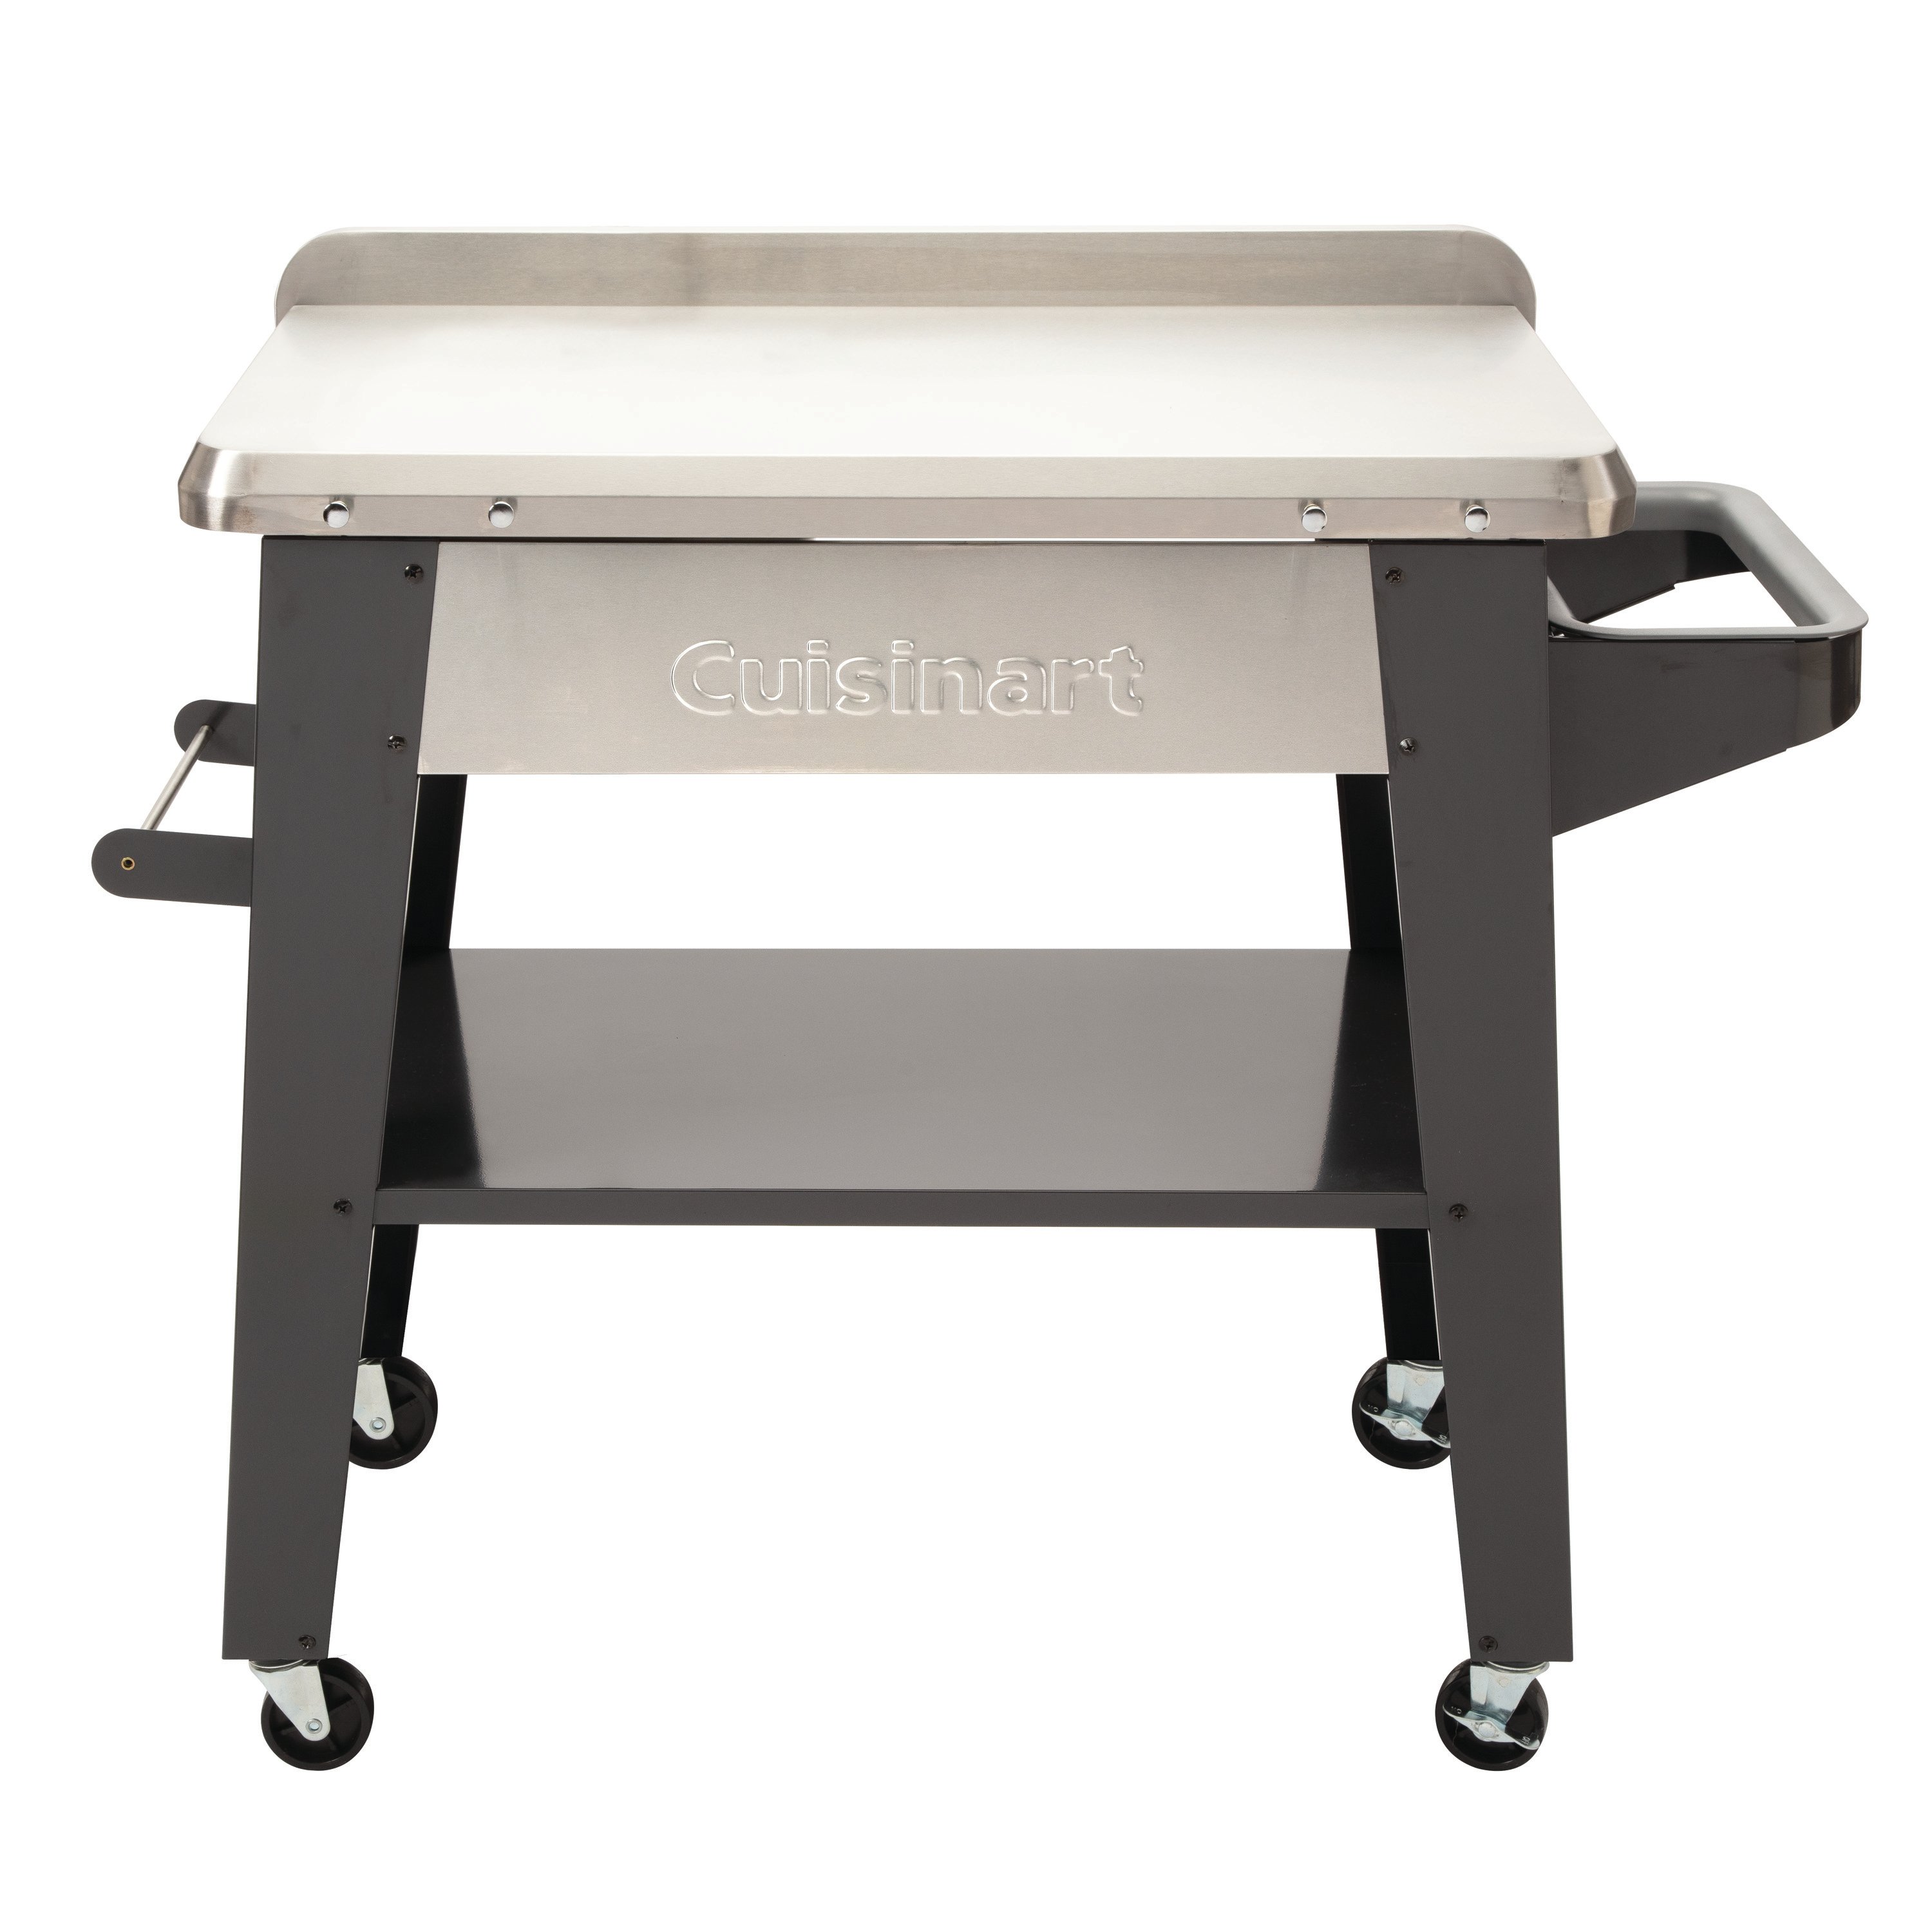 Outdoor Prep Table Cuisinart Com, Outdoor Prep Table With Storage